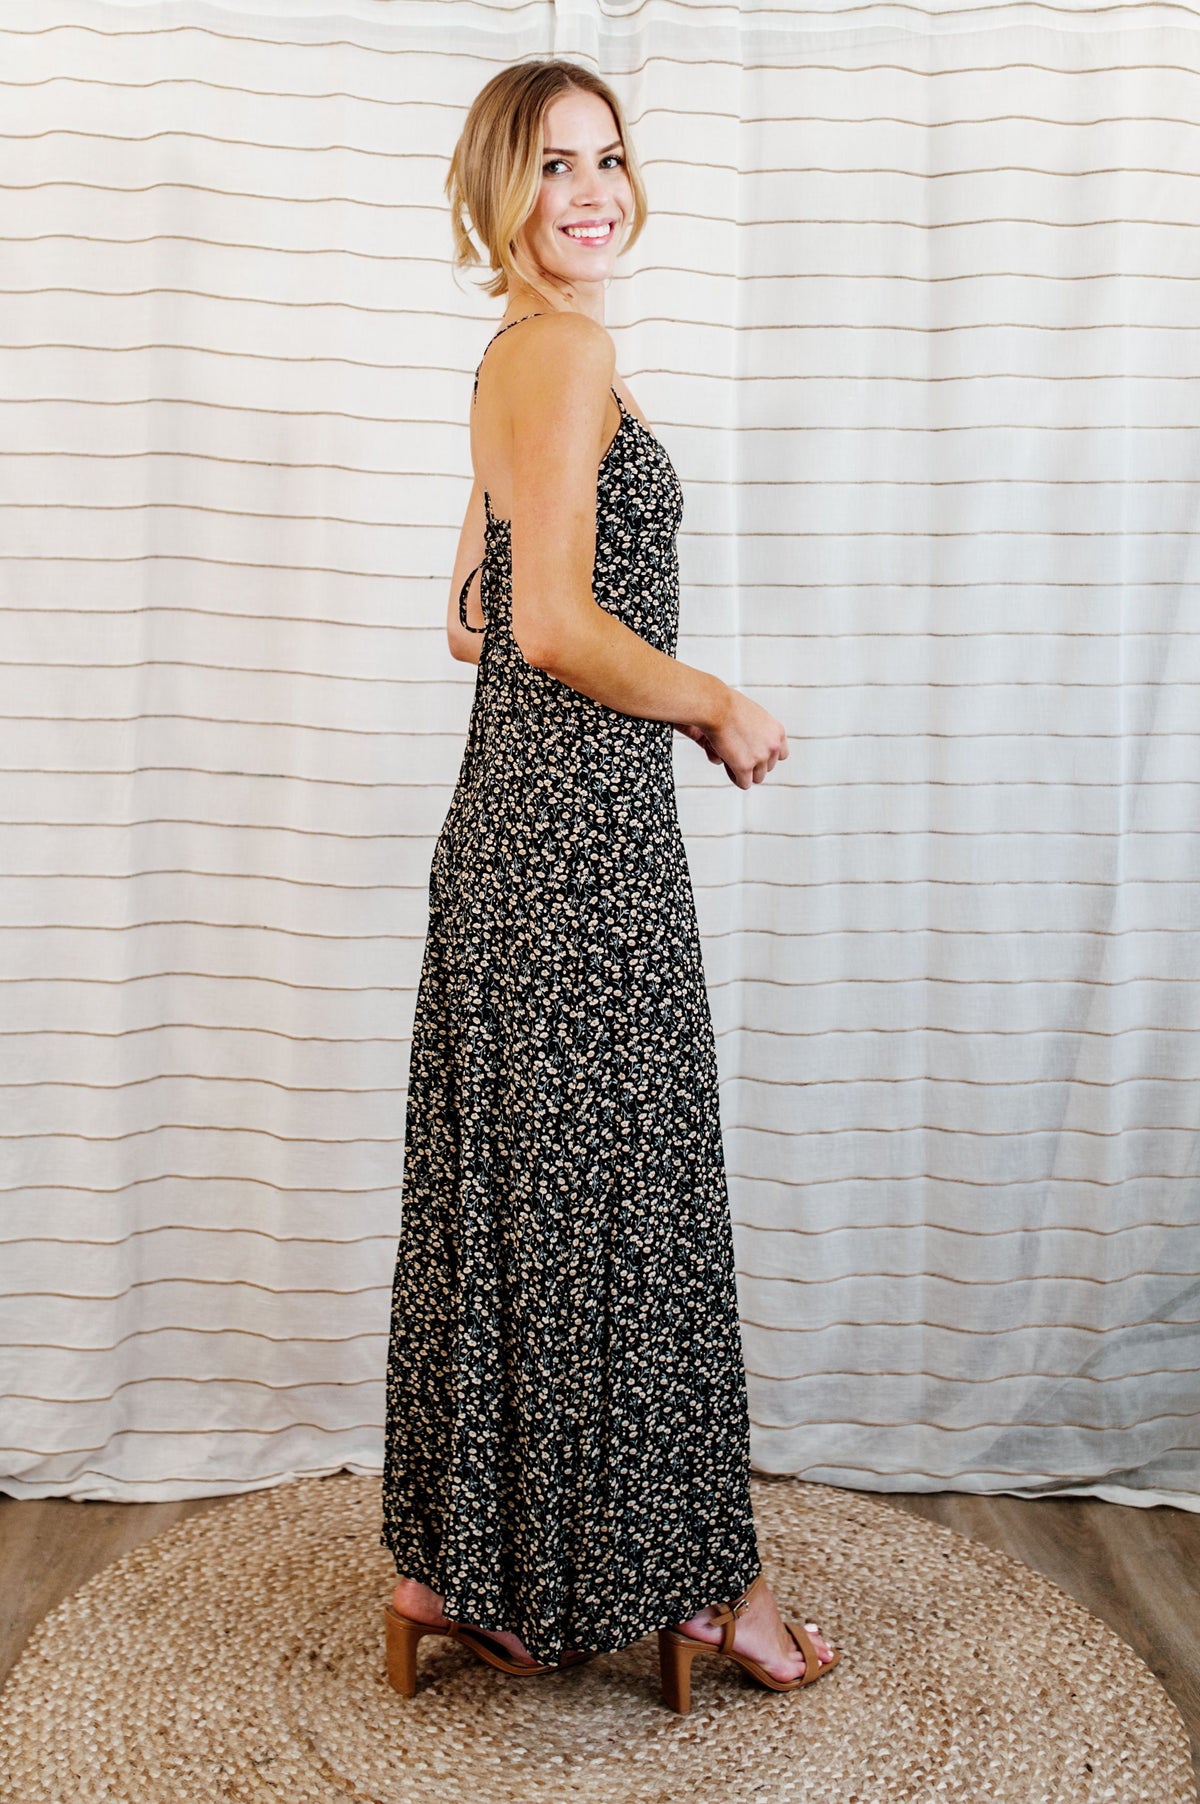 Pictured is a floral jumpsuit with a sweetheart bust, criss-cross shoulder ties, strappy open back, and wide-leg pants.